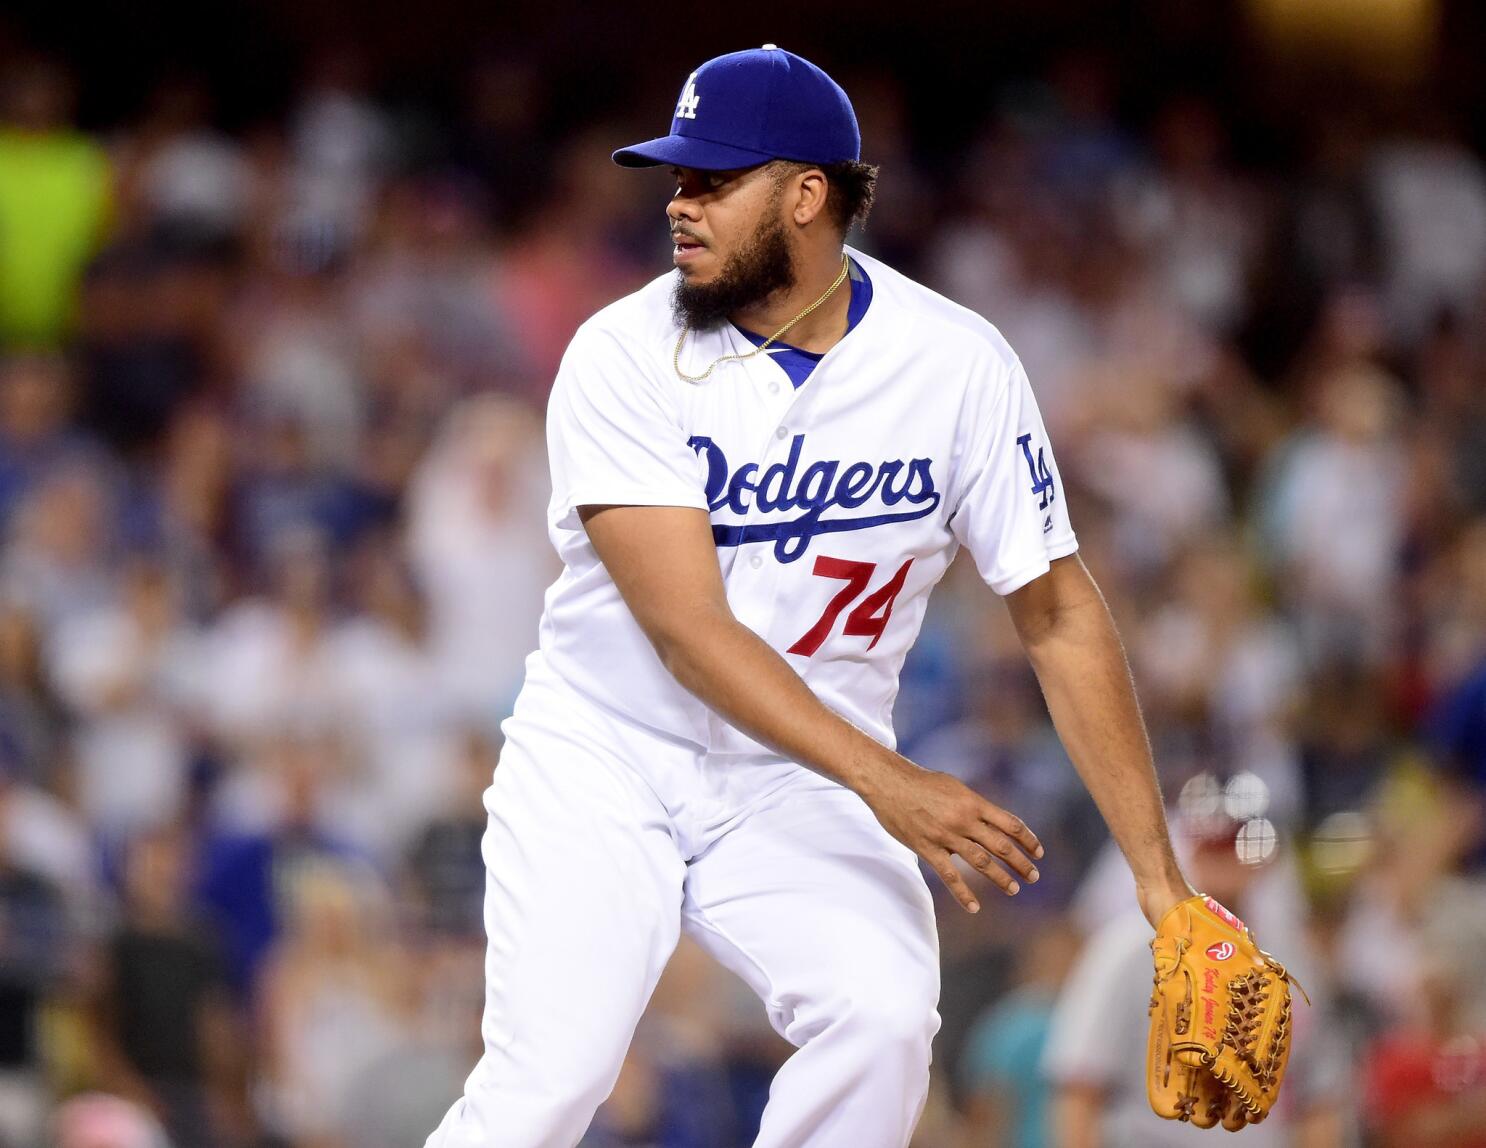 Kenley Jansen sets Dodgers' saves record in 4-1 win - Los Angeles